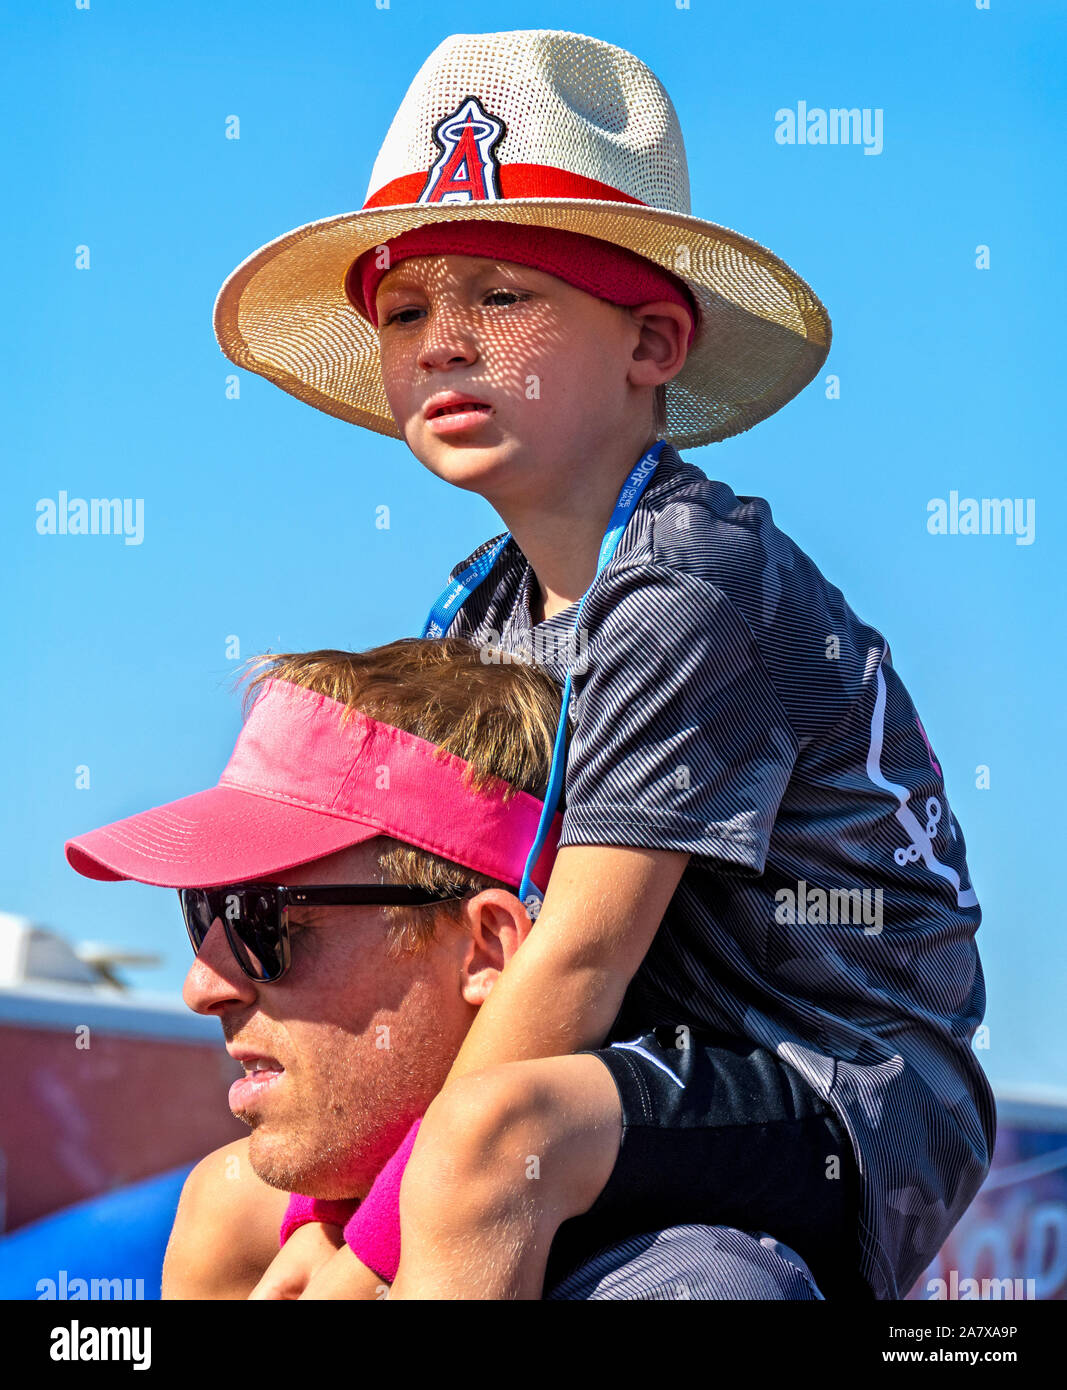 Anaheim, CA / USA - Nov 3, 2019: Son wearing hat sits on his dad's shoulders against a blue sky at the 2019 JDRF One Walk fundraiser. Type 1 diabetes. Stock Photo